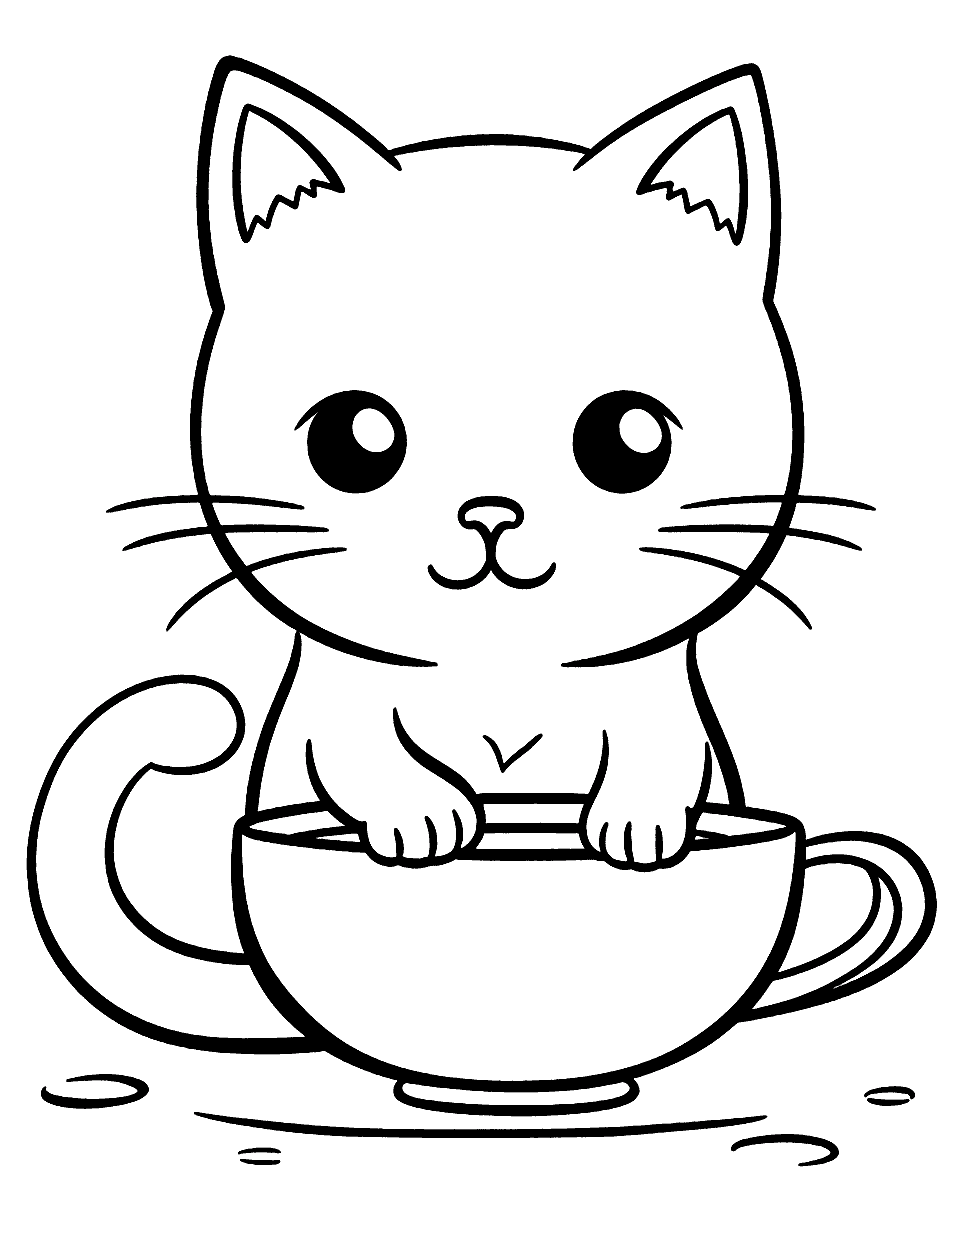 Kawaii Cat With a Cup of Hot Cocoa Coloring Page - A cute kawaii cat sipping on a steaming cup of hot cocoa.